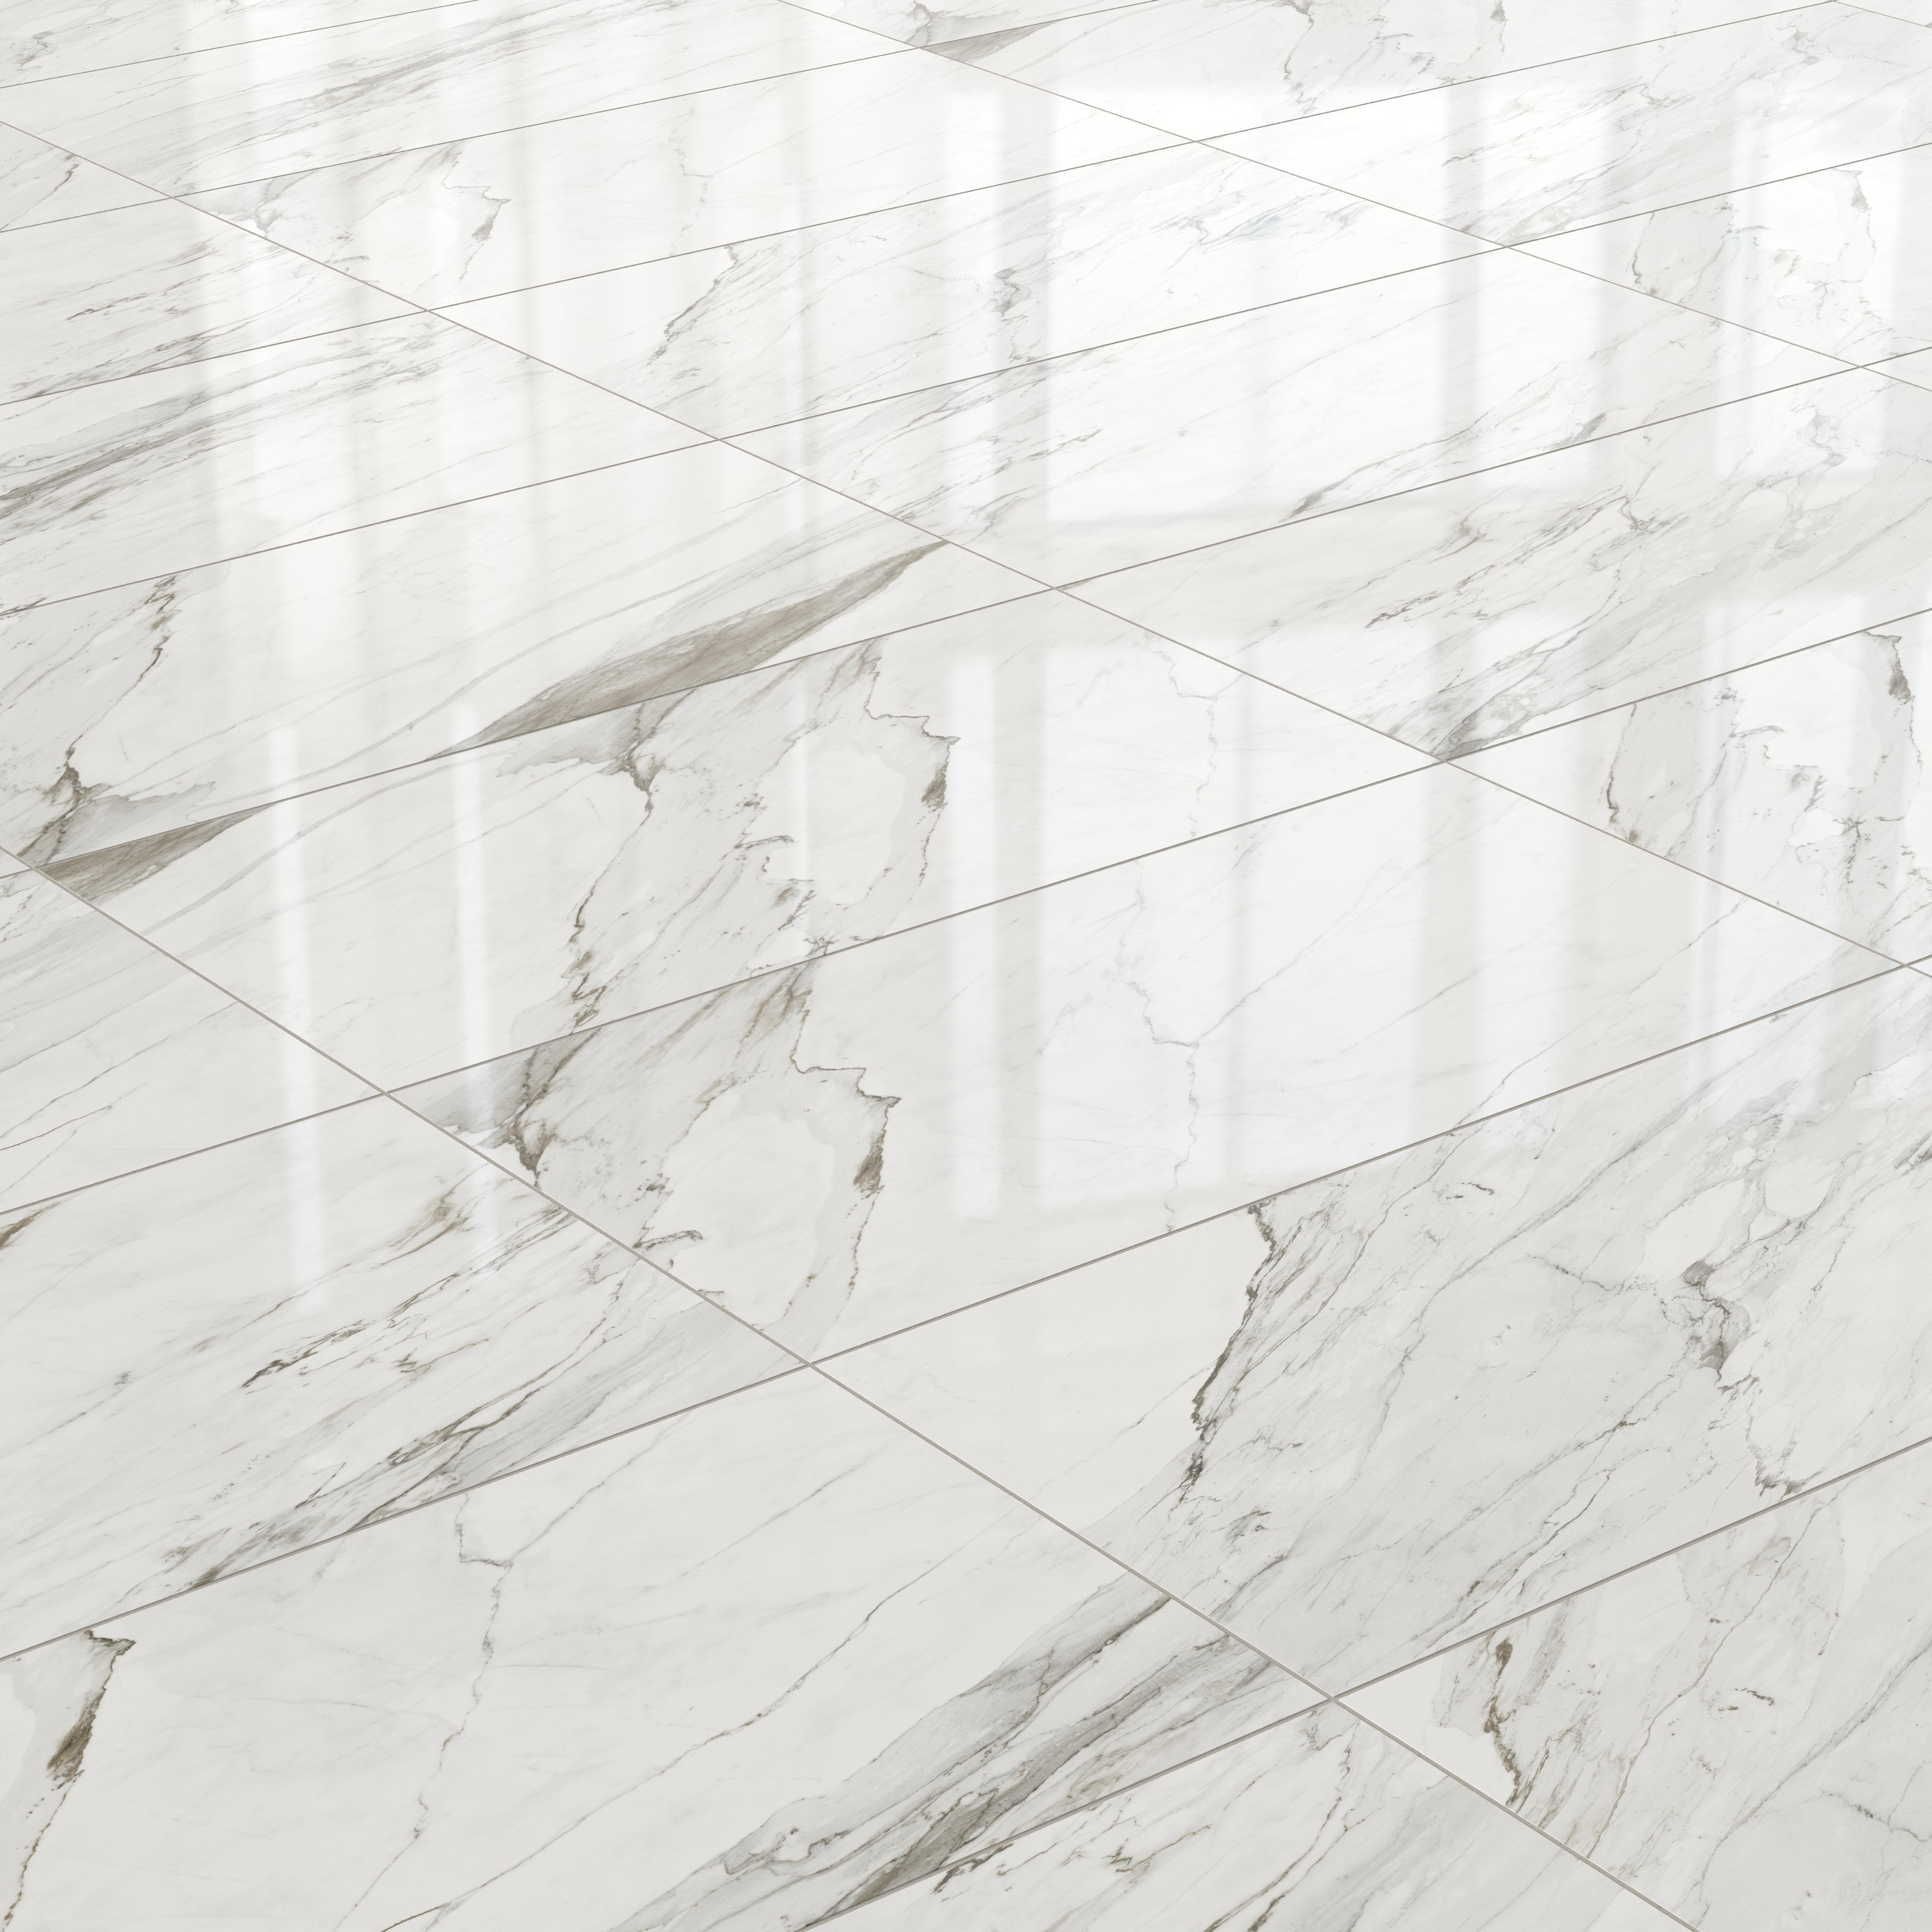 Chantel 24x48 Polished Porcelain Tile in Apuano